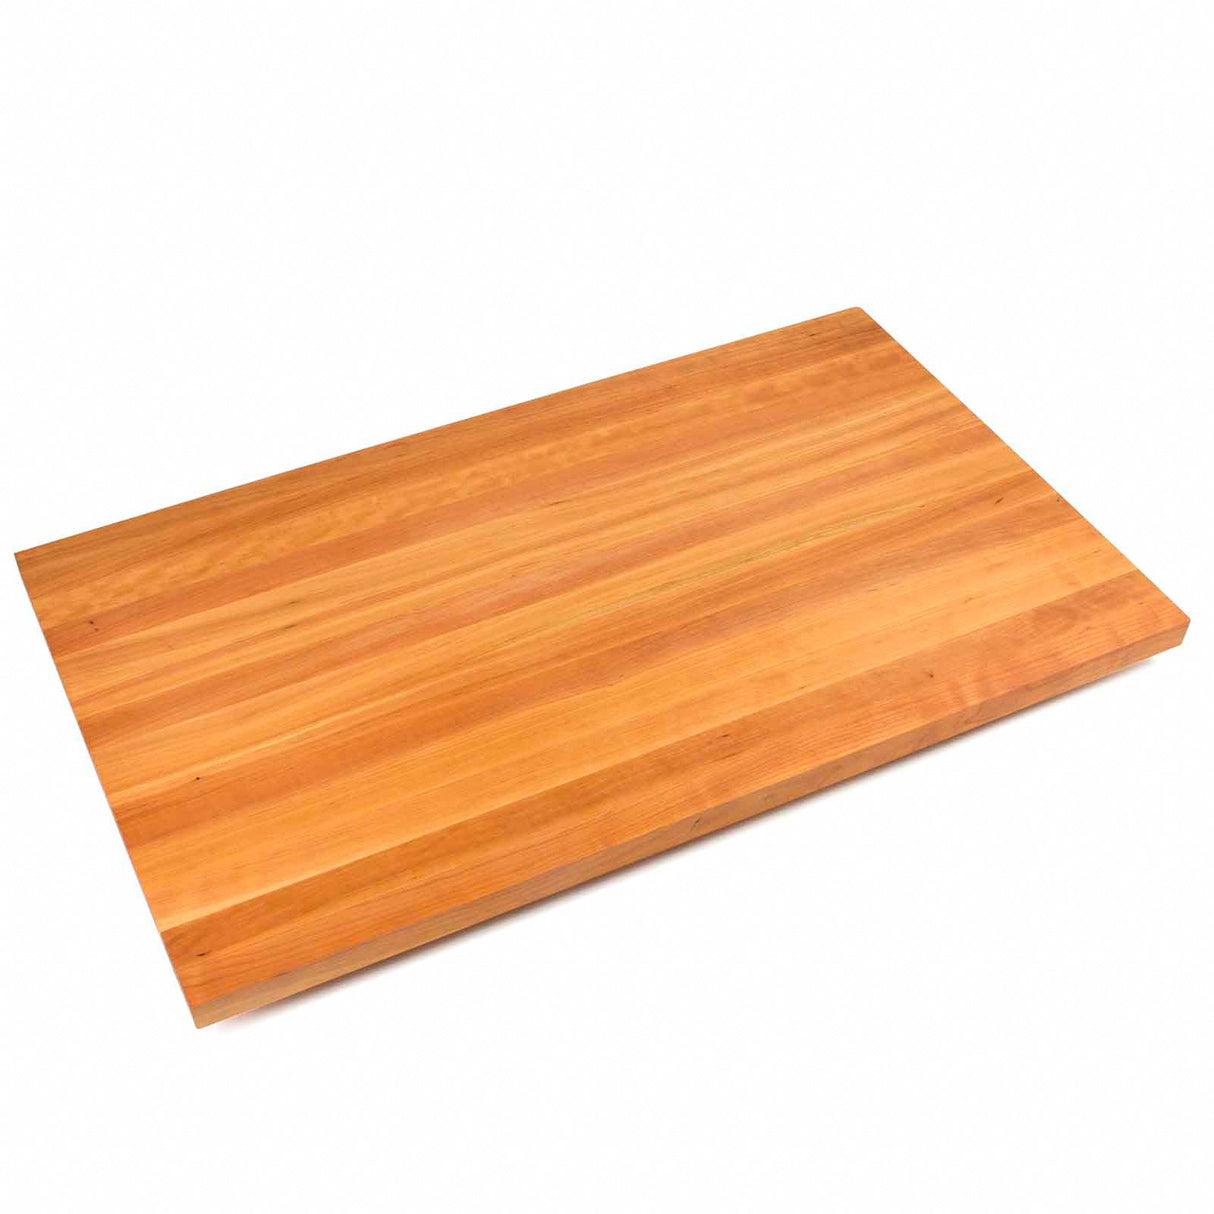 John Boos CHYKCT4848-O Cherry Kitchen Counter Top with Varnique Finish, 1.75" Thickness, 48" x